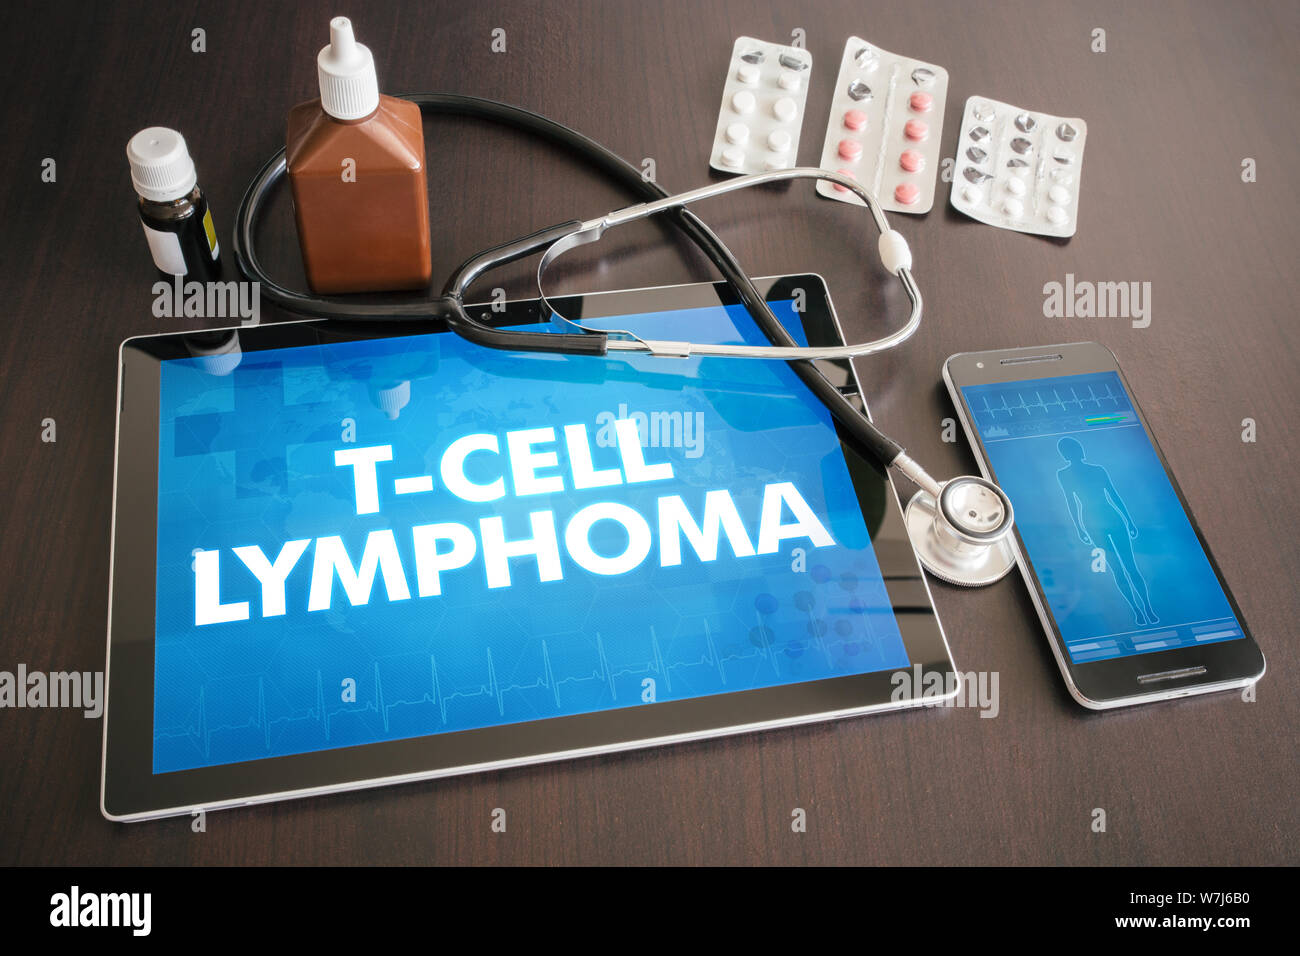 T-cell lymphoma (cancer type) diagnosis medical concept on tablet screen with stethoscope. Stock Photo